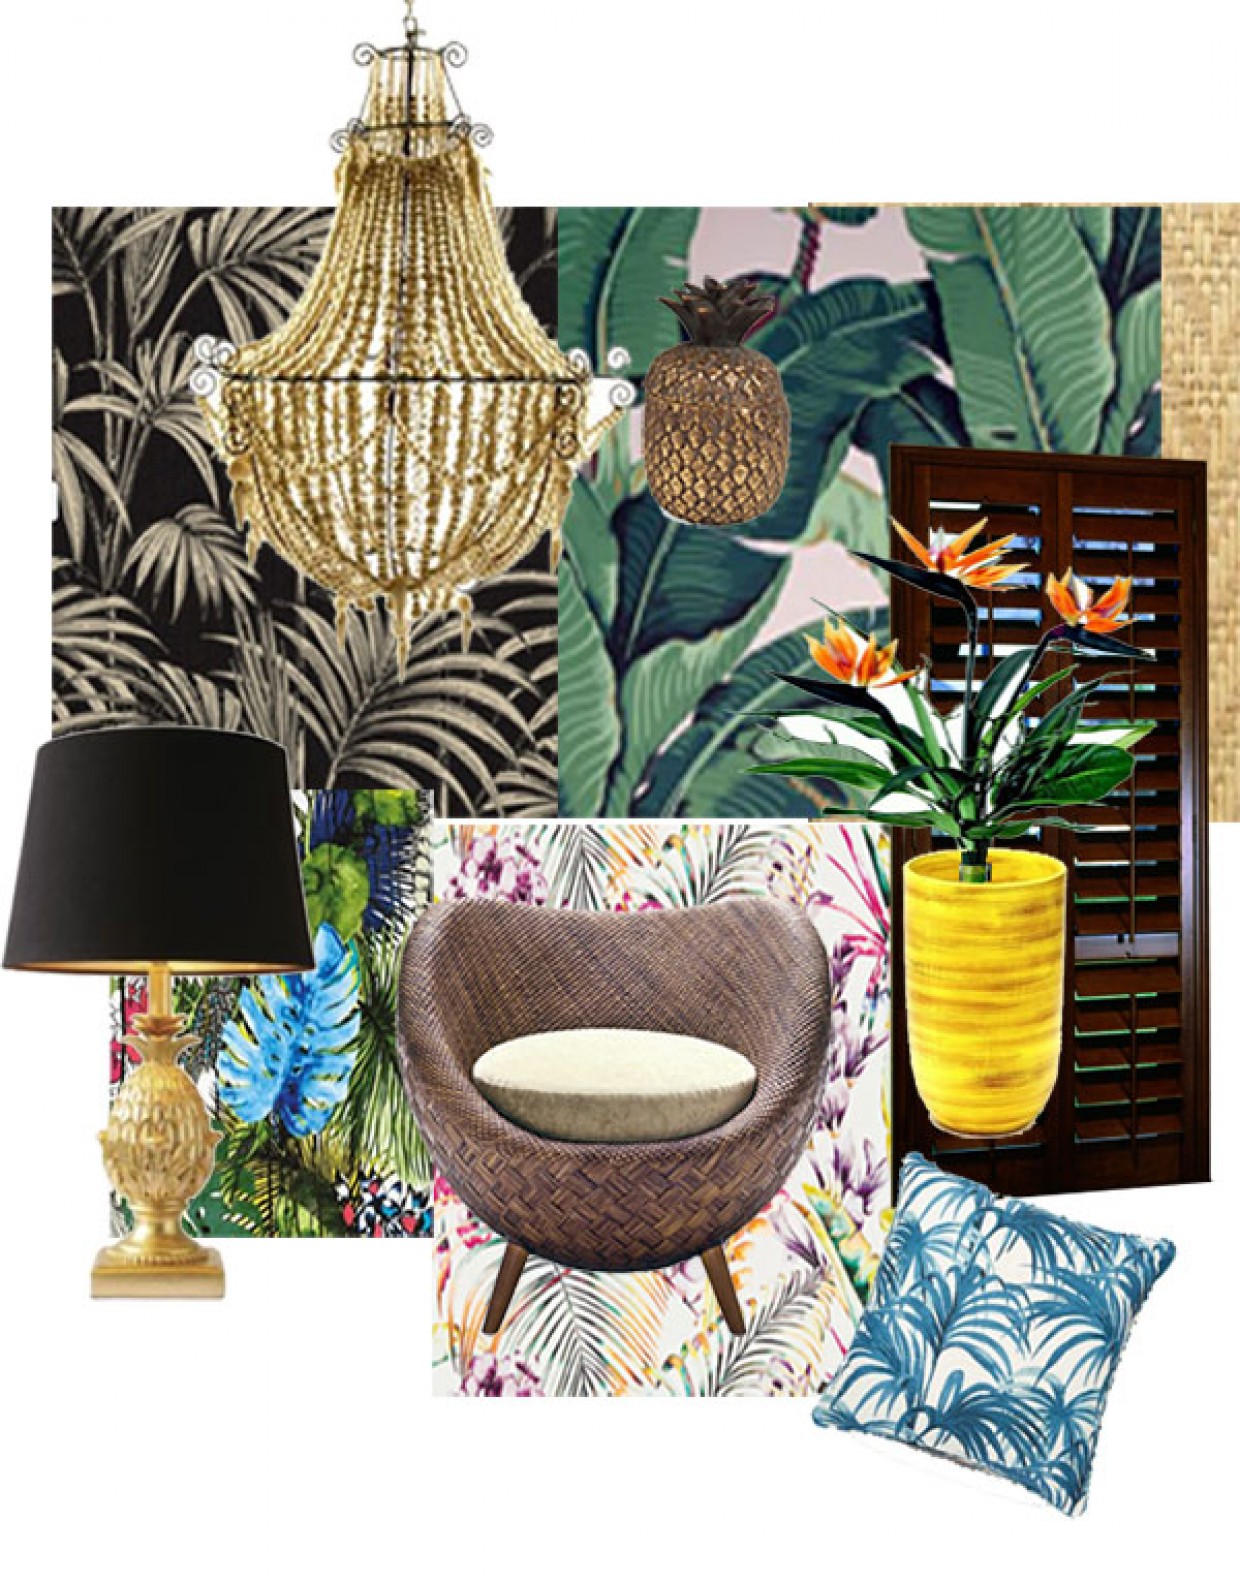 STYLE – TROPICAL CHIC